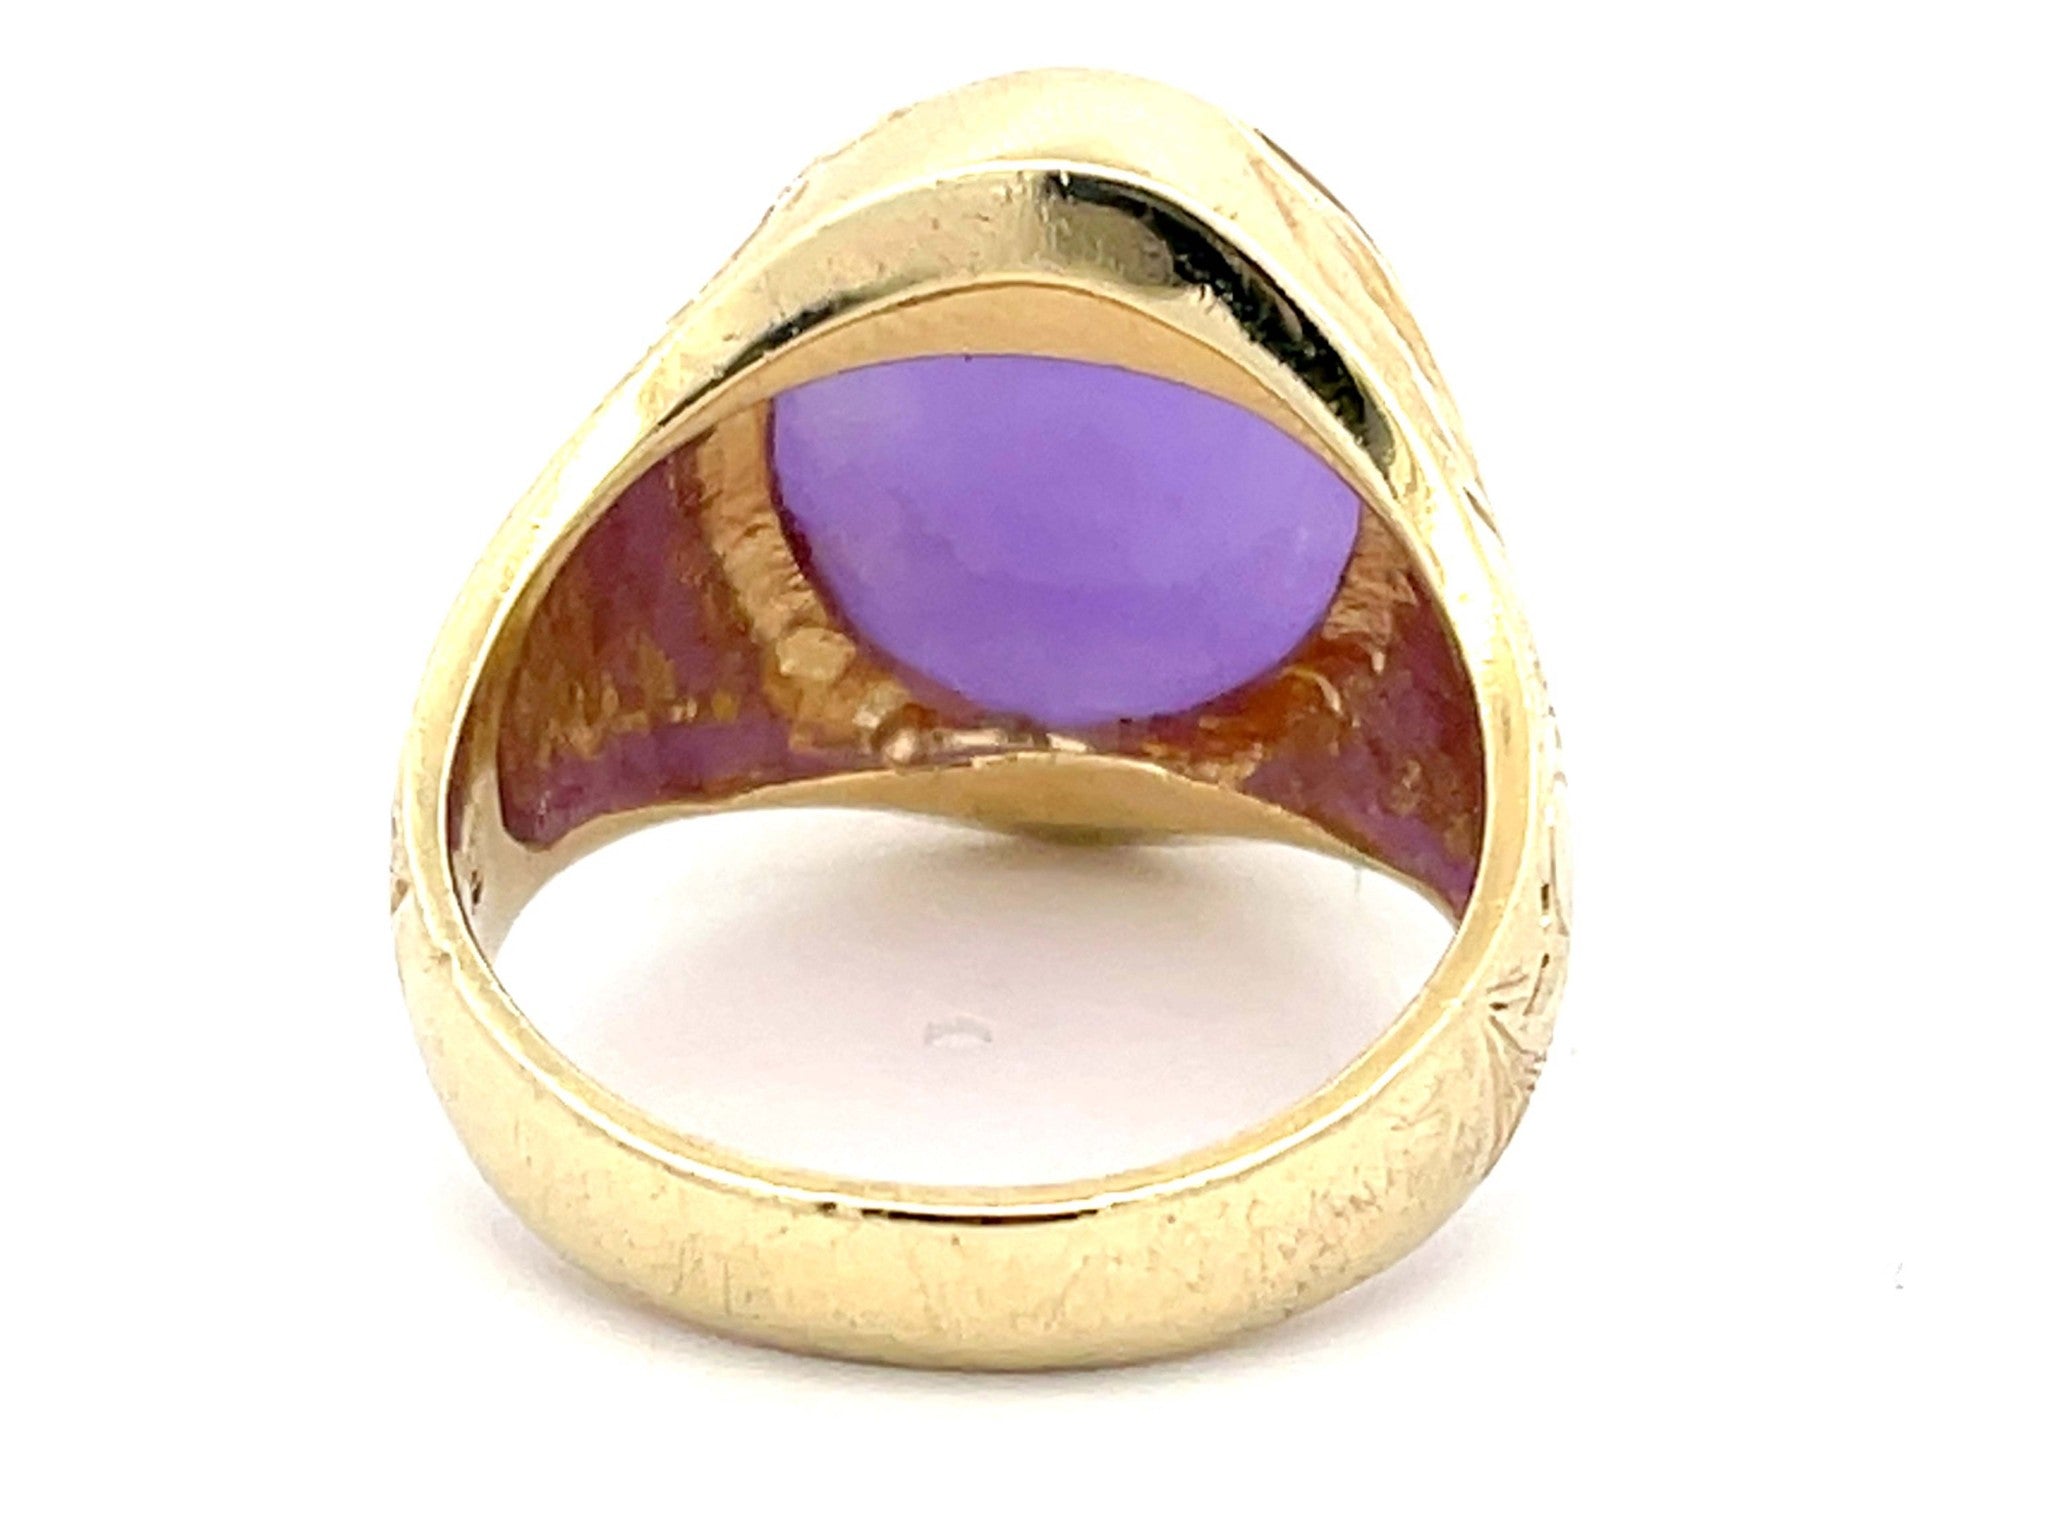 Purple Jade Cabochon Ring with Leaf Design in 14k Yellow Gold